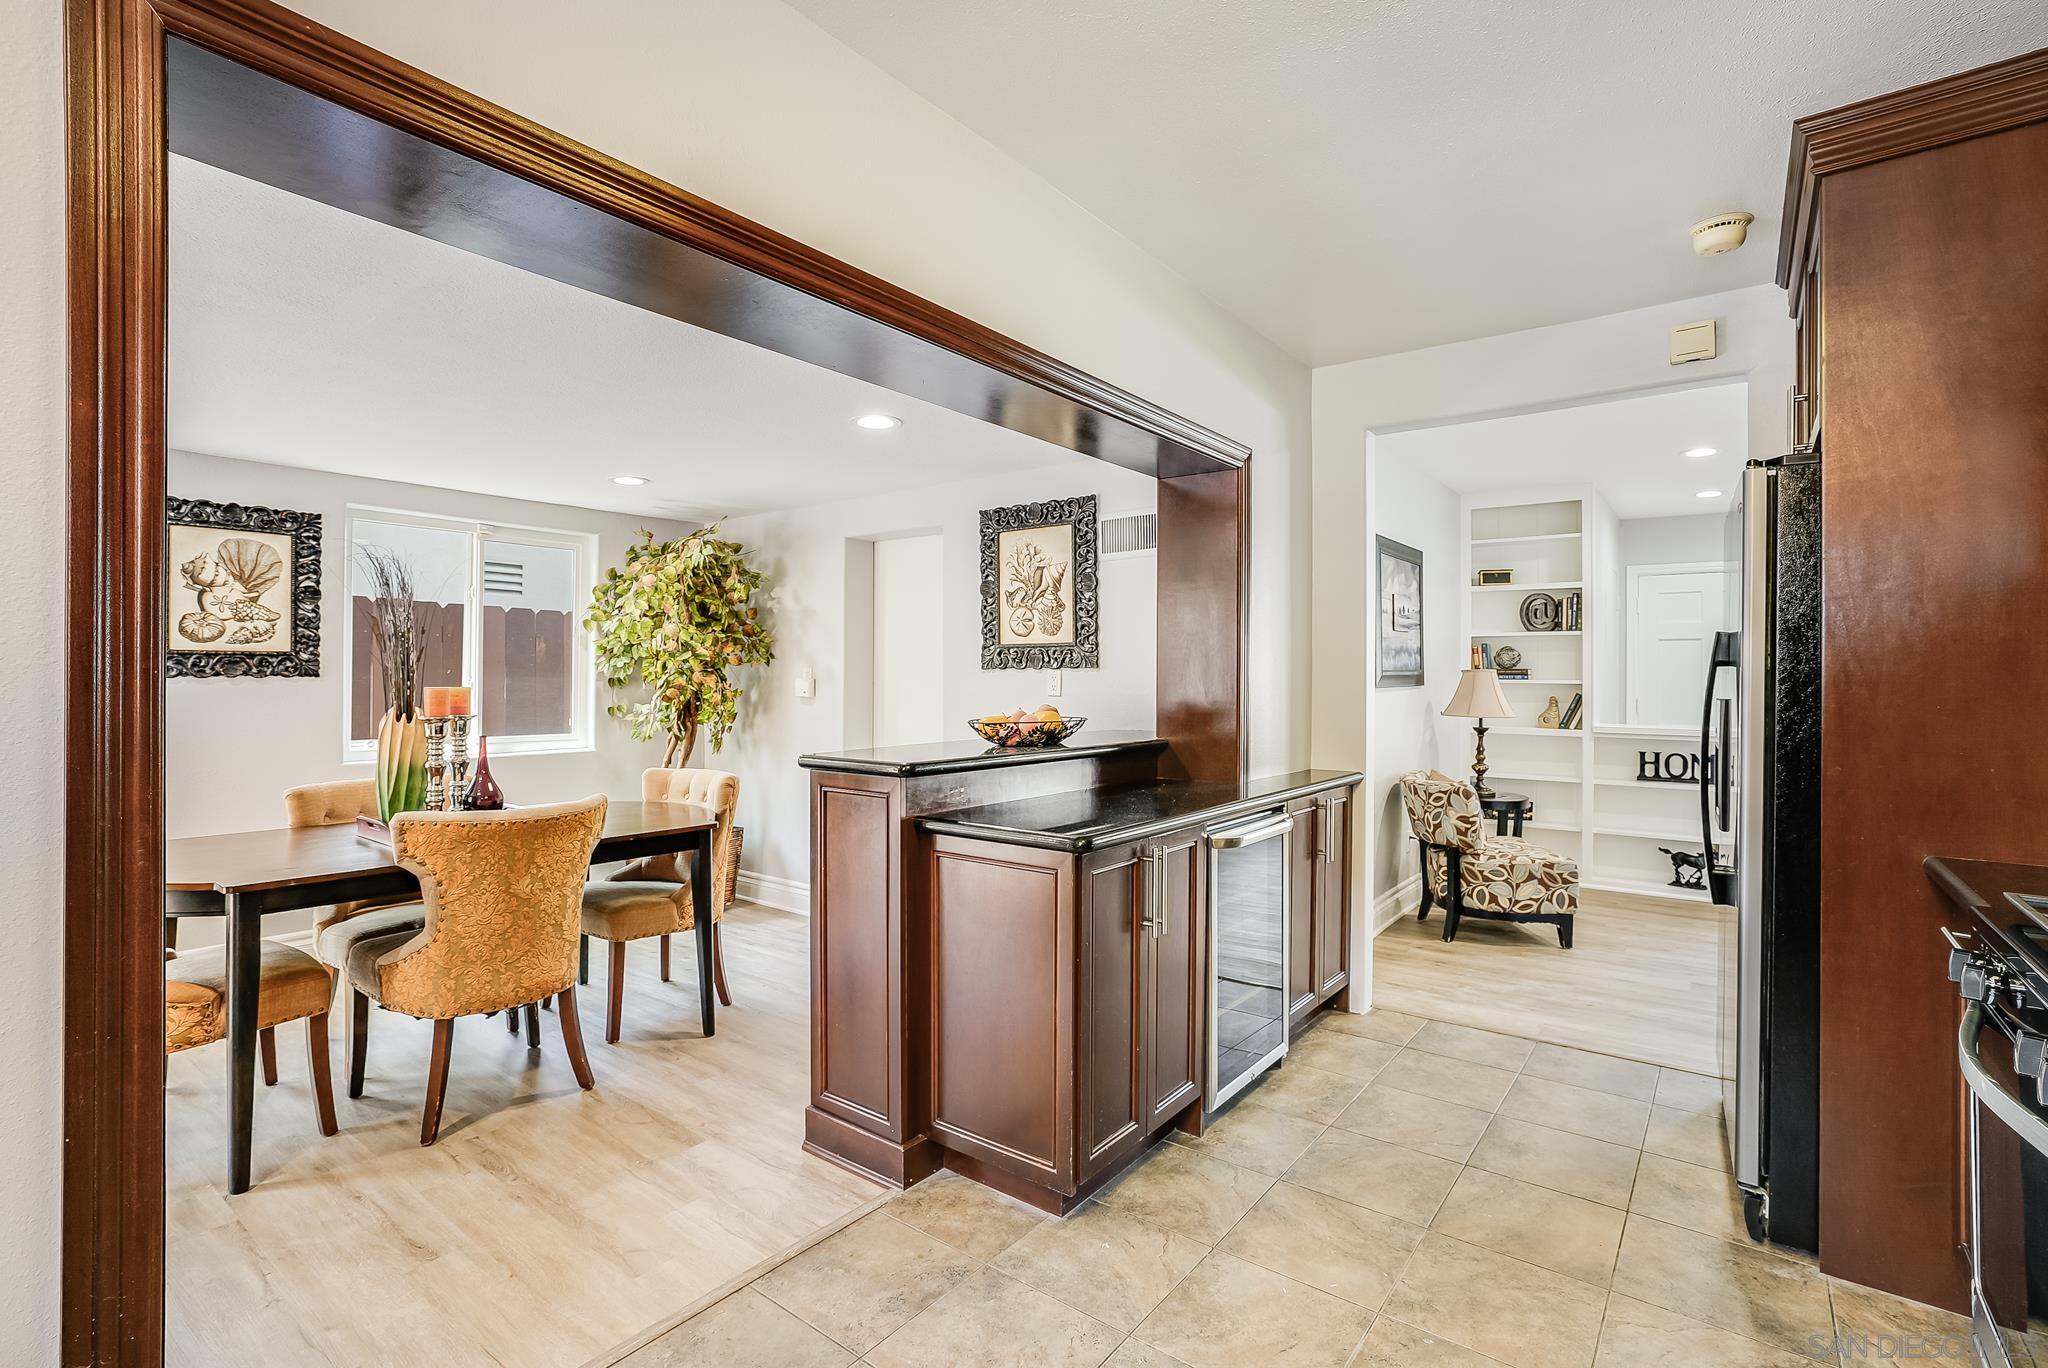 a open kitchen with stainless steel appliances kitchen island granite countertop a table and chairs in it